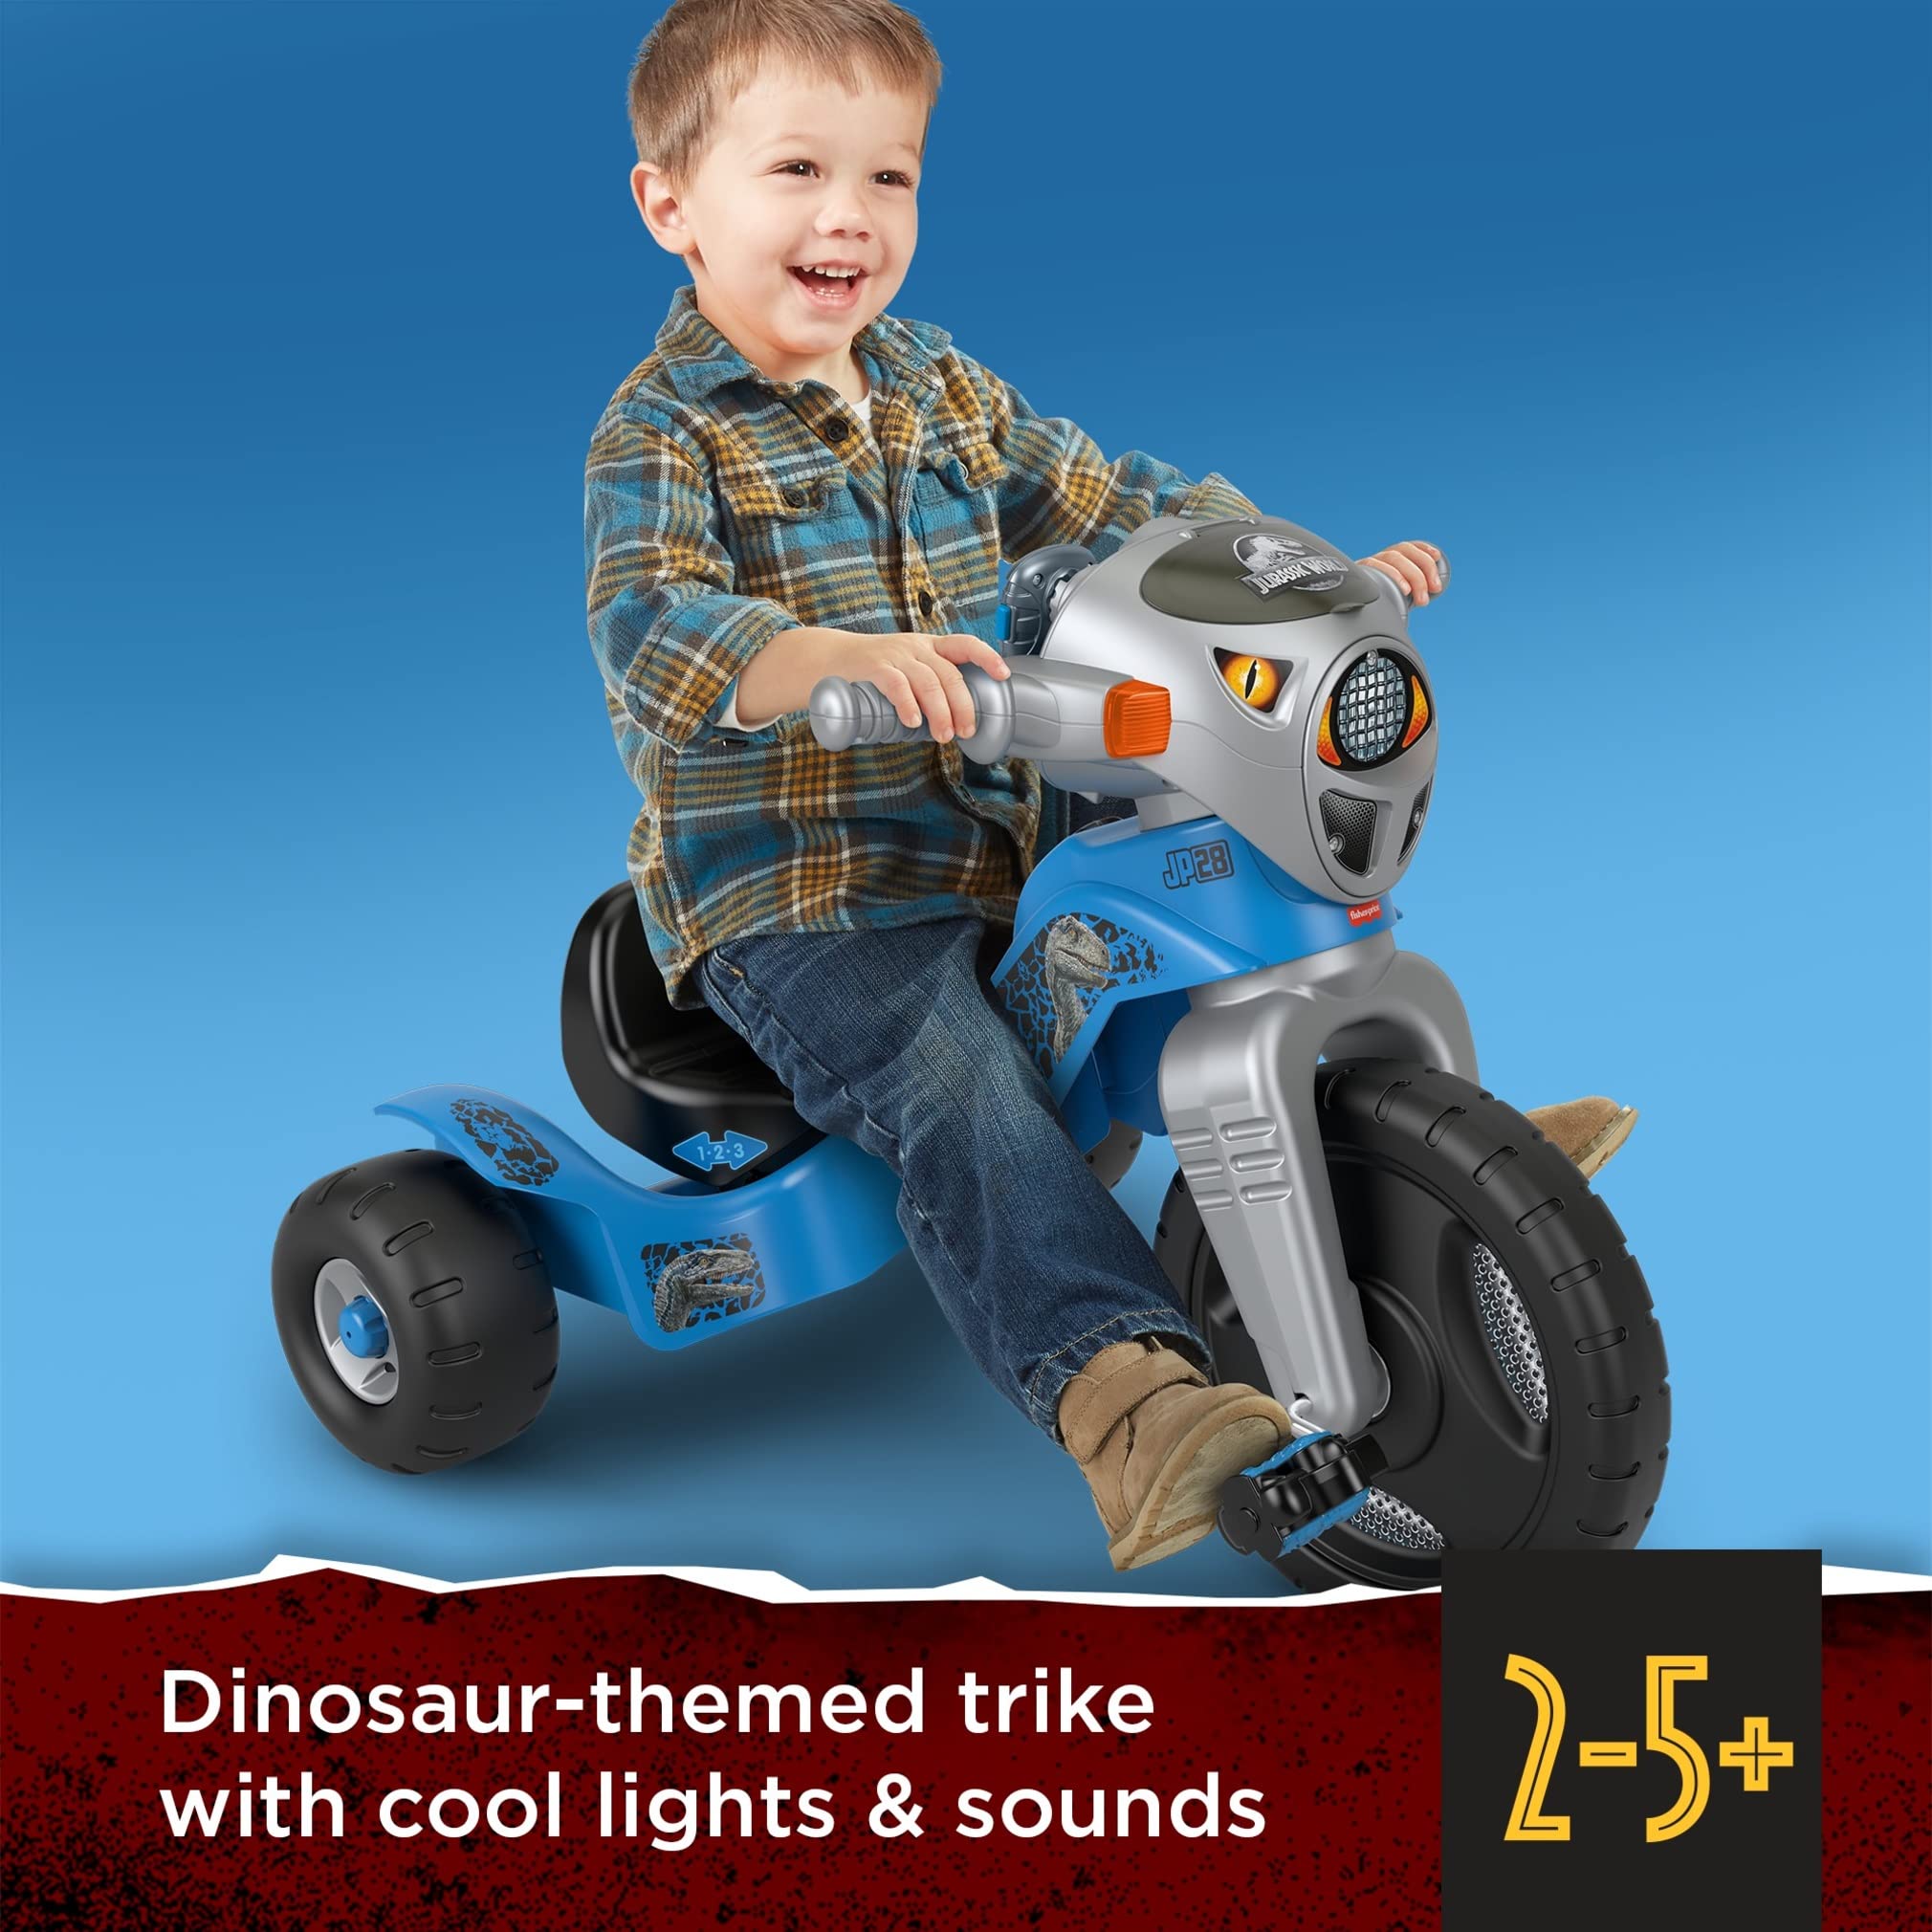 Fisher-Price Jurassic World Toddler Tricycle Lights & Sounds Trike Velociraptor Dinosaur Bike with Handlebar Grips and Storage